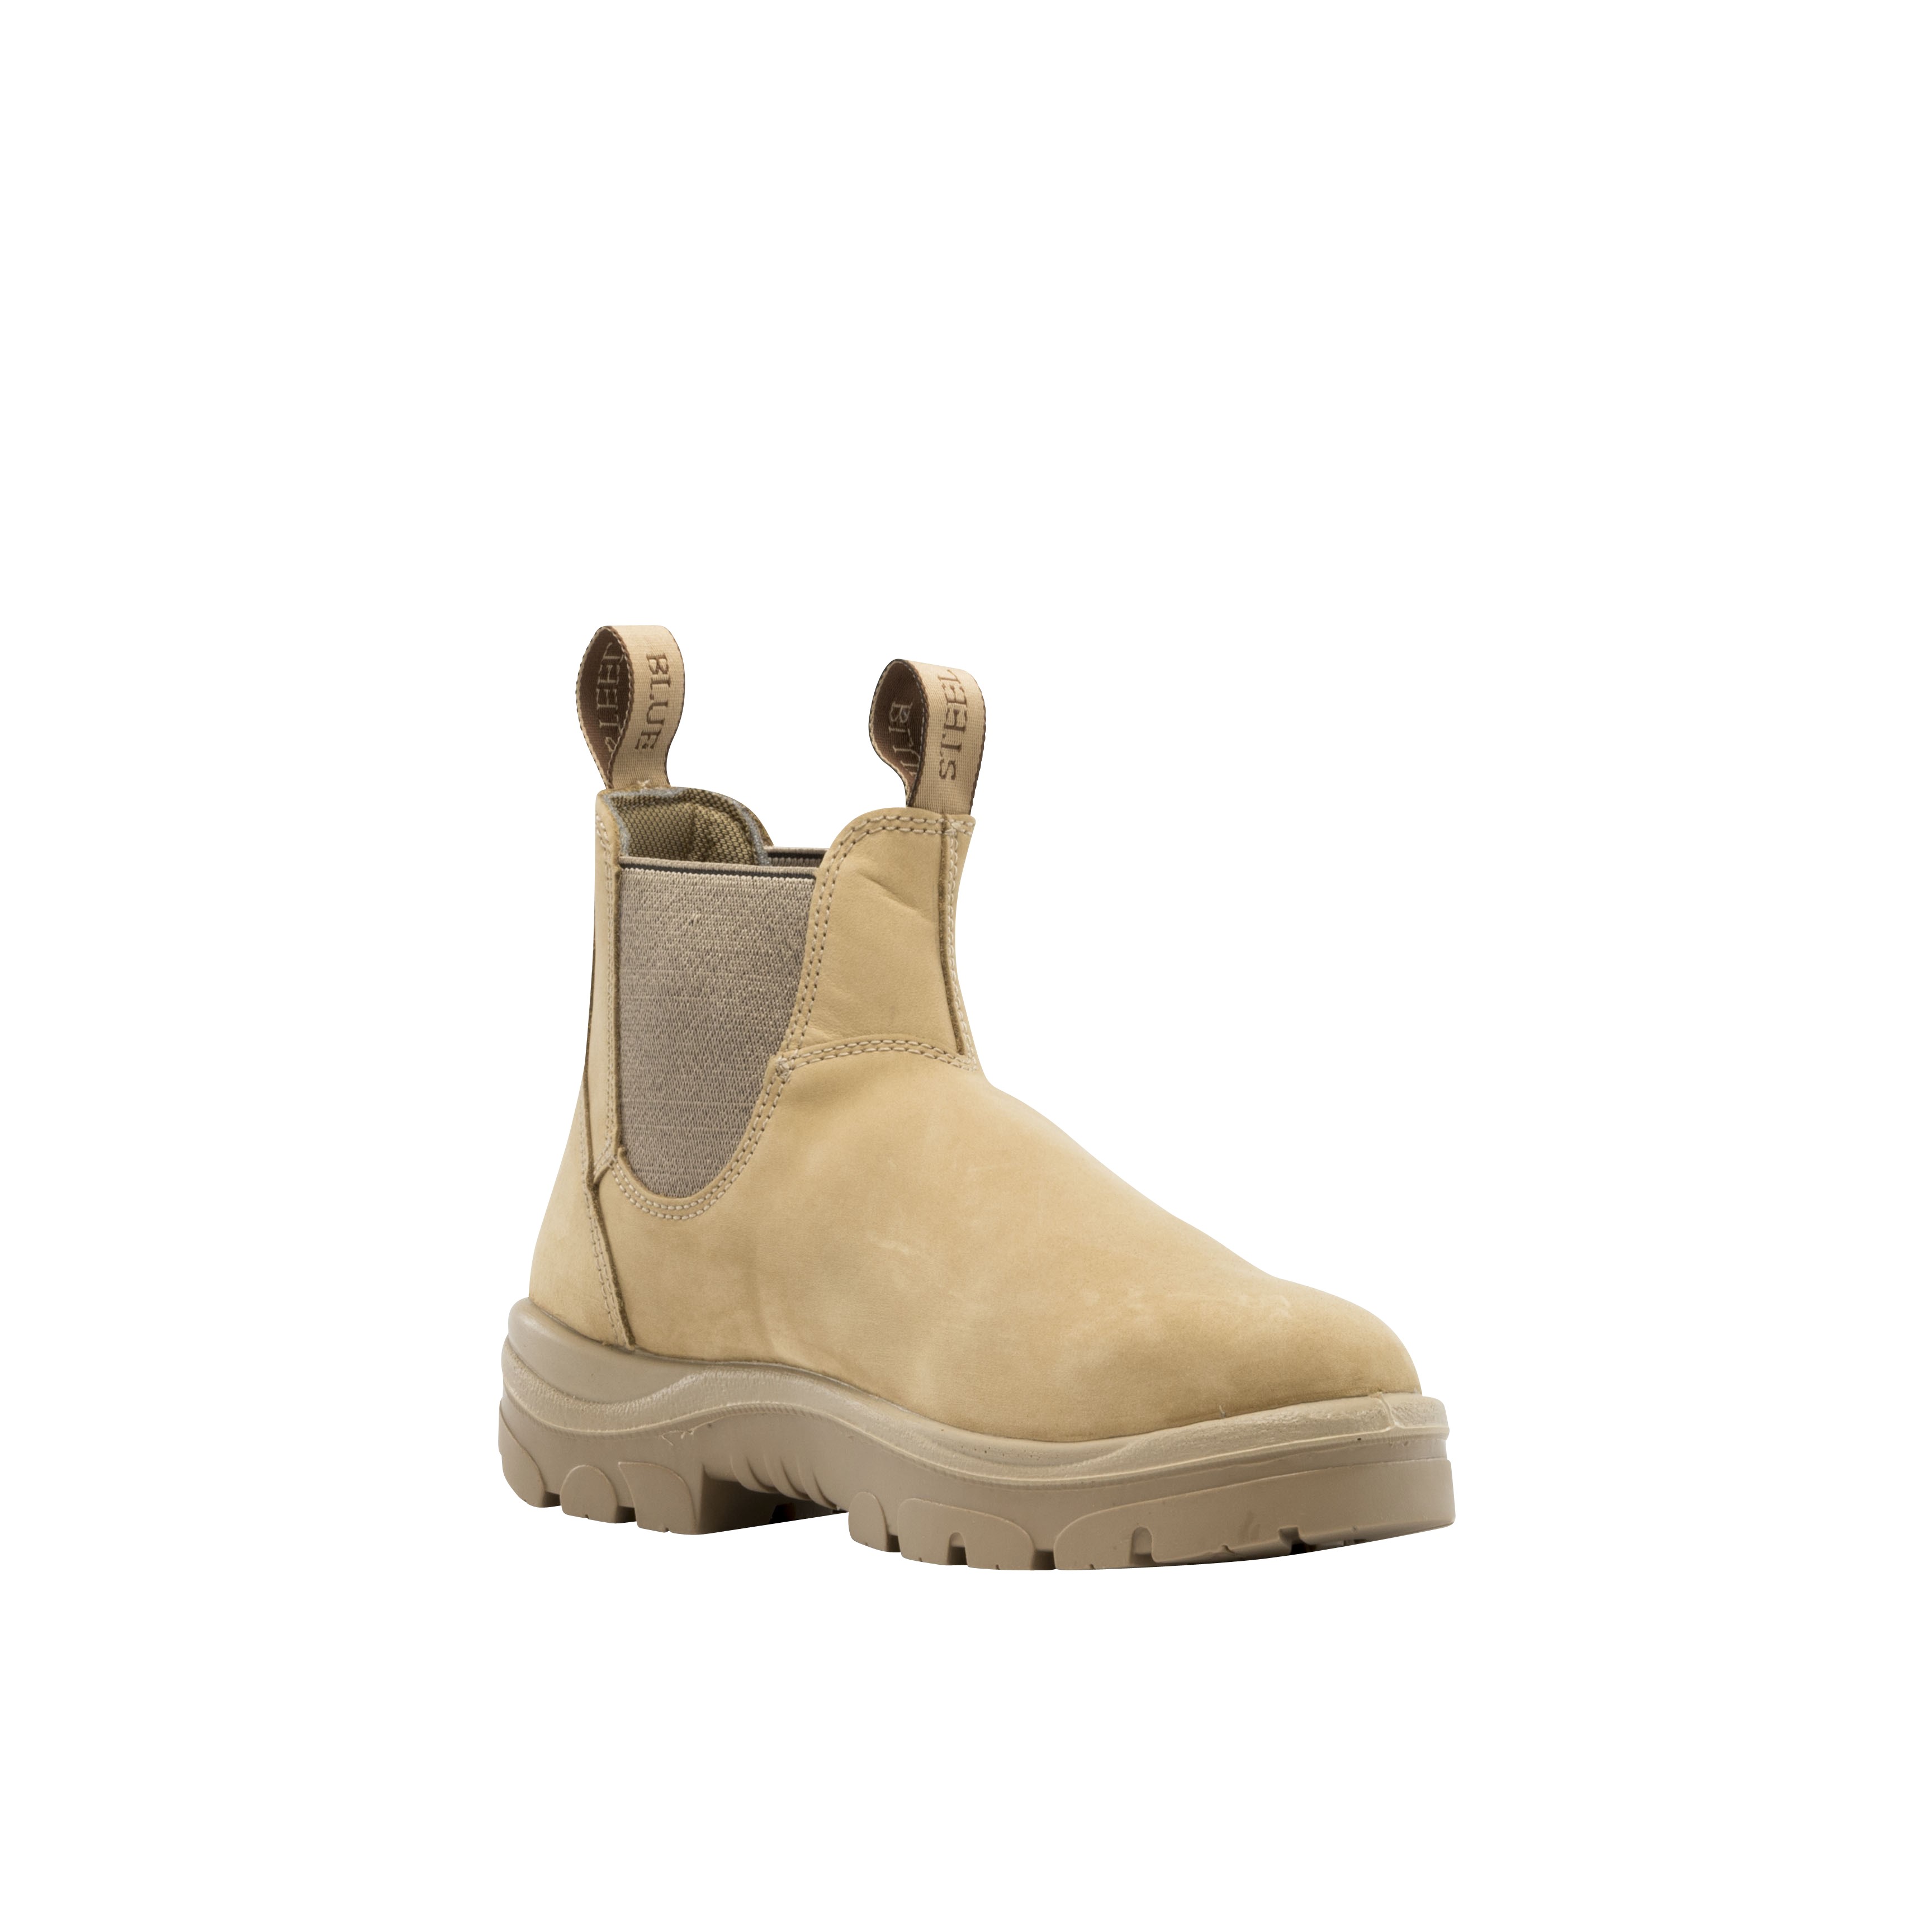 SAFETY BOOT HOBART SAND SIZE 10 -PULL ON STEEL TOE CAP